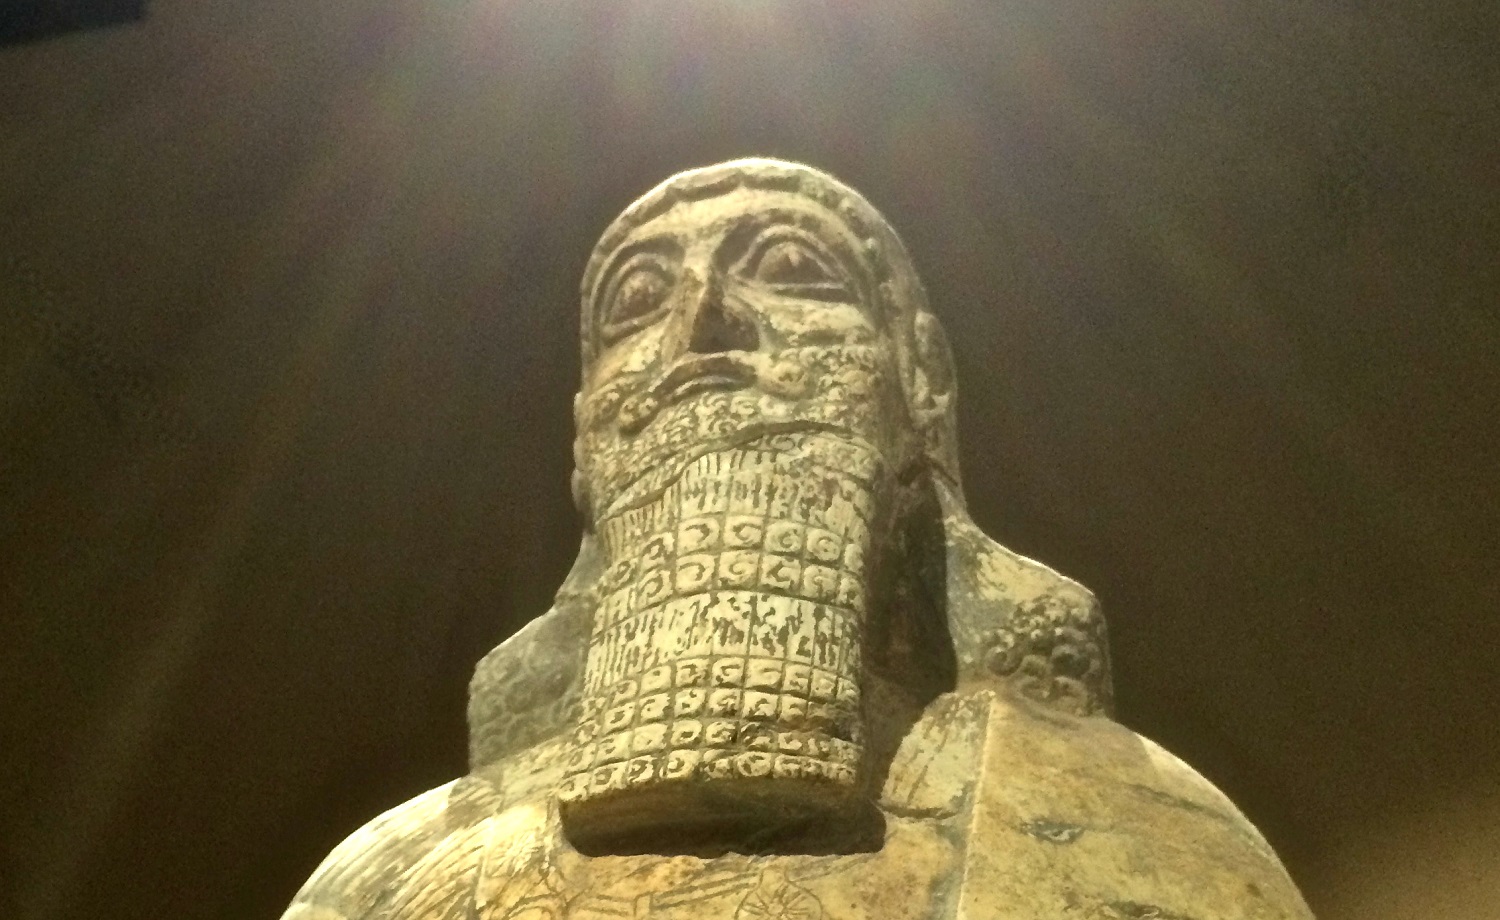 A statue of Shalmaneser, an Assyrian ruler, stolen in 2003 and returned from the US to Iraq (Tom Westcott/MEE)